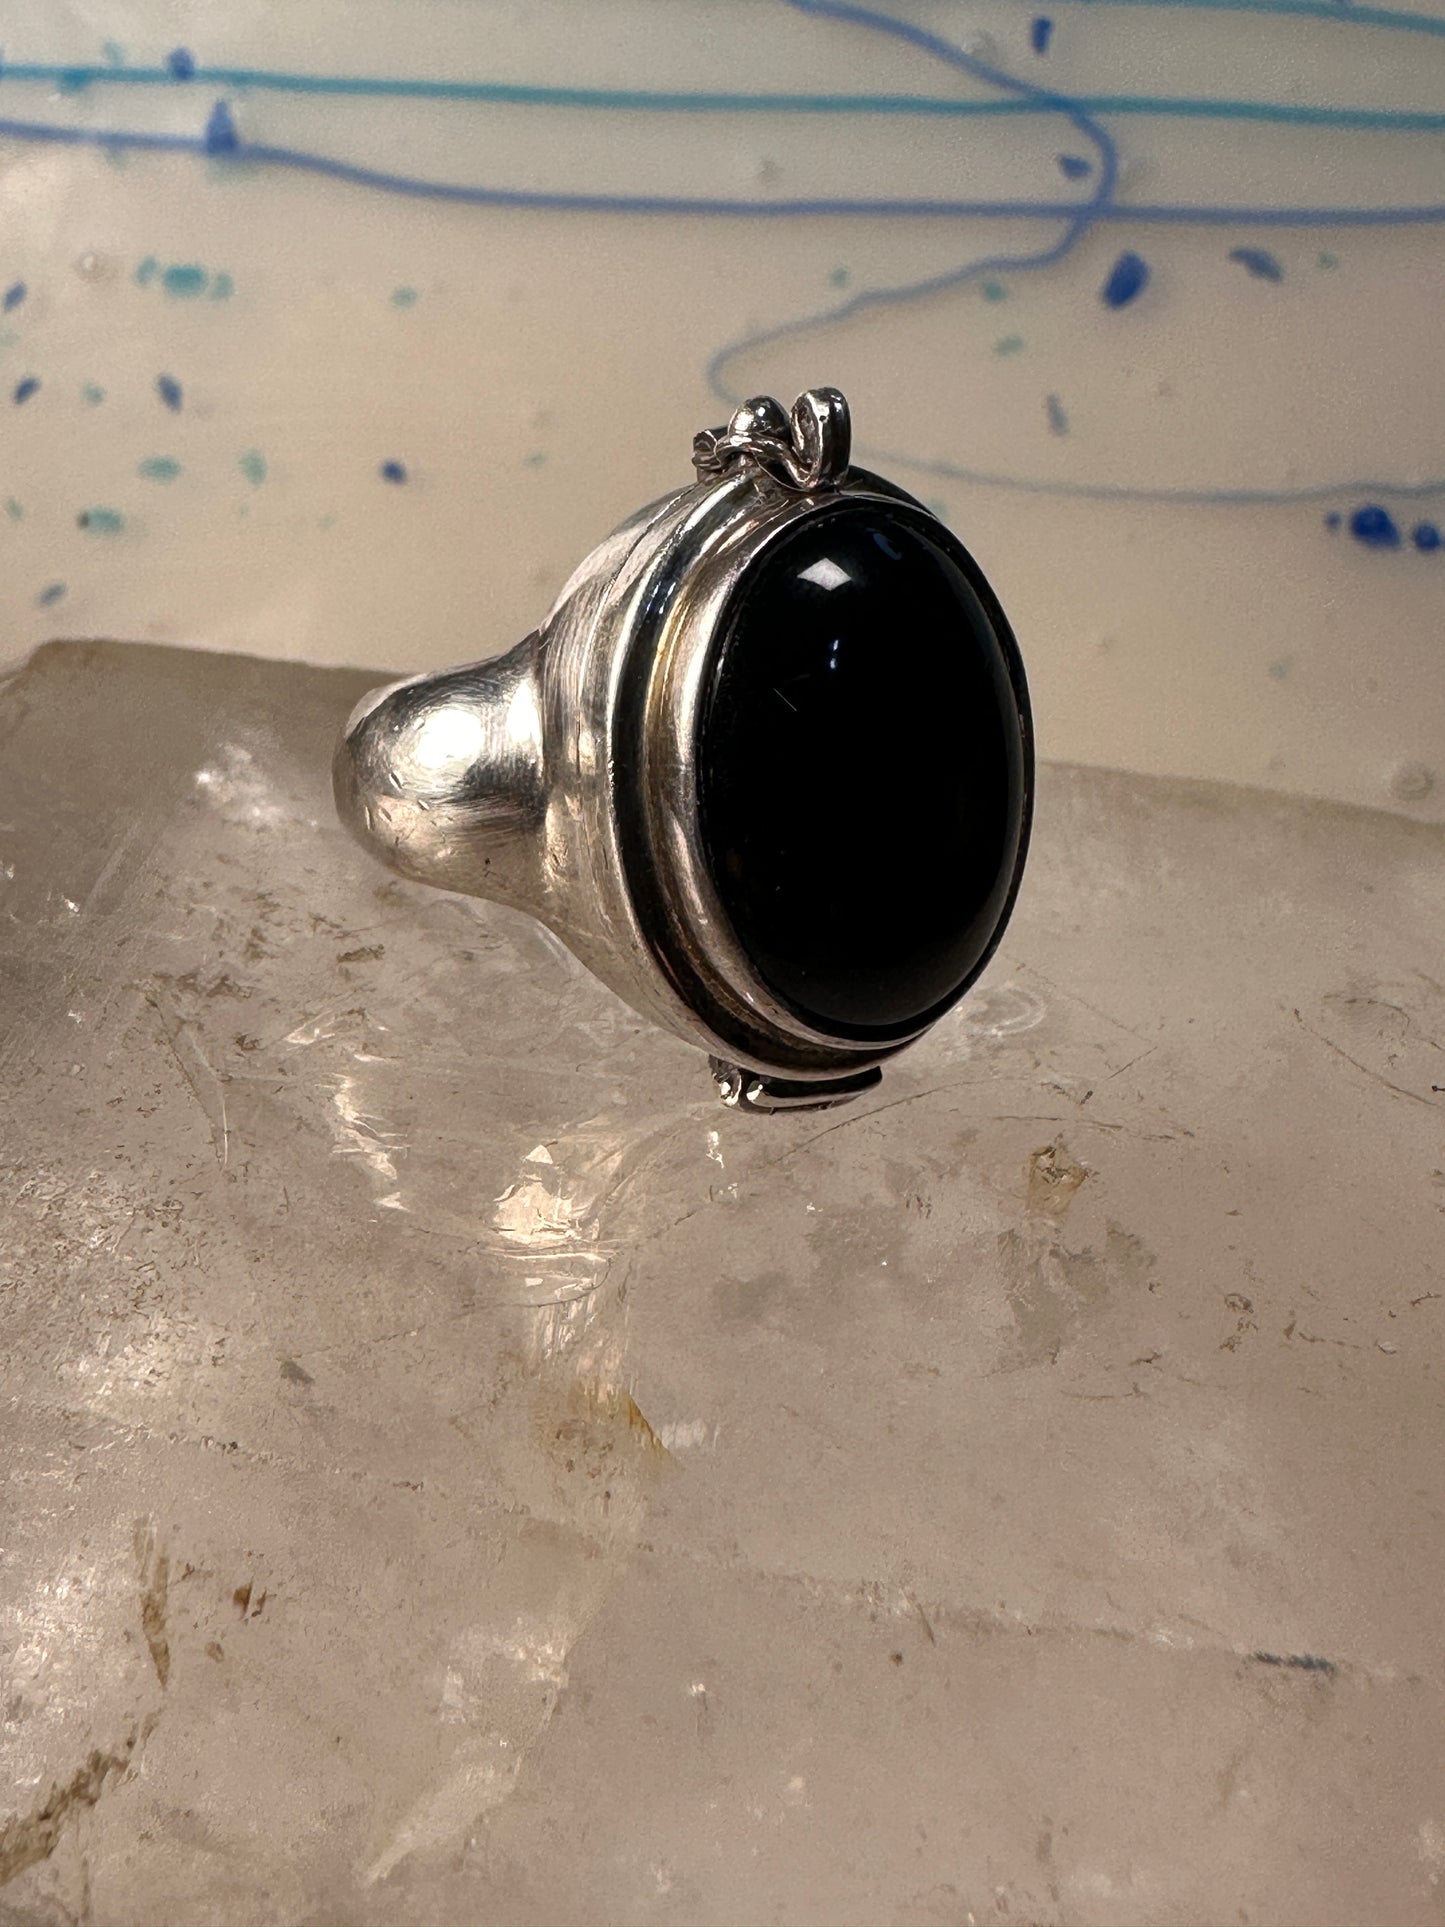 Poison ring onyx heavy band size 8 sterling silver women men